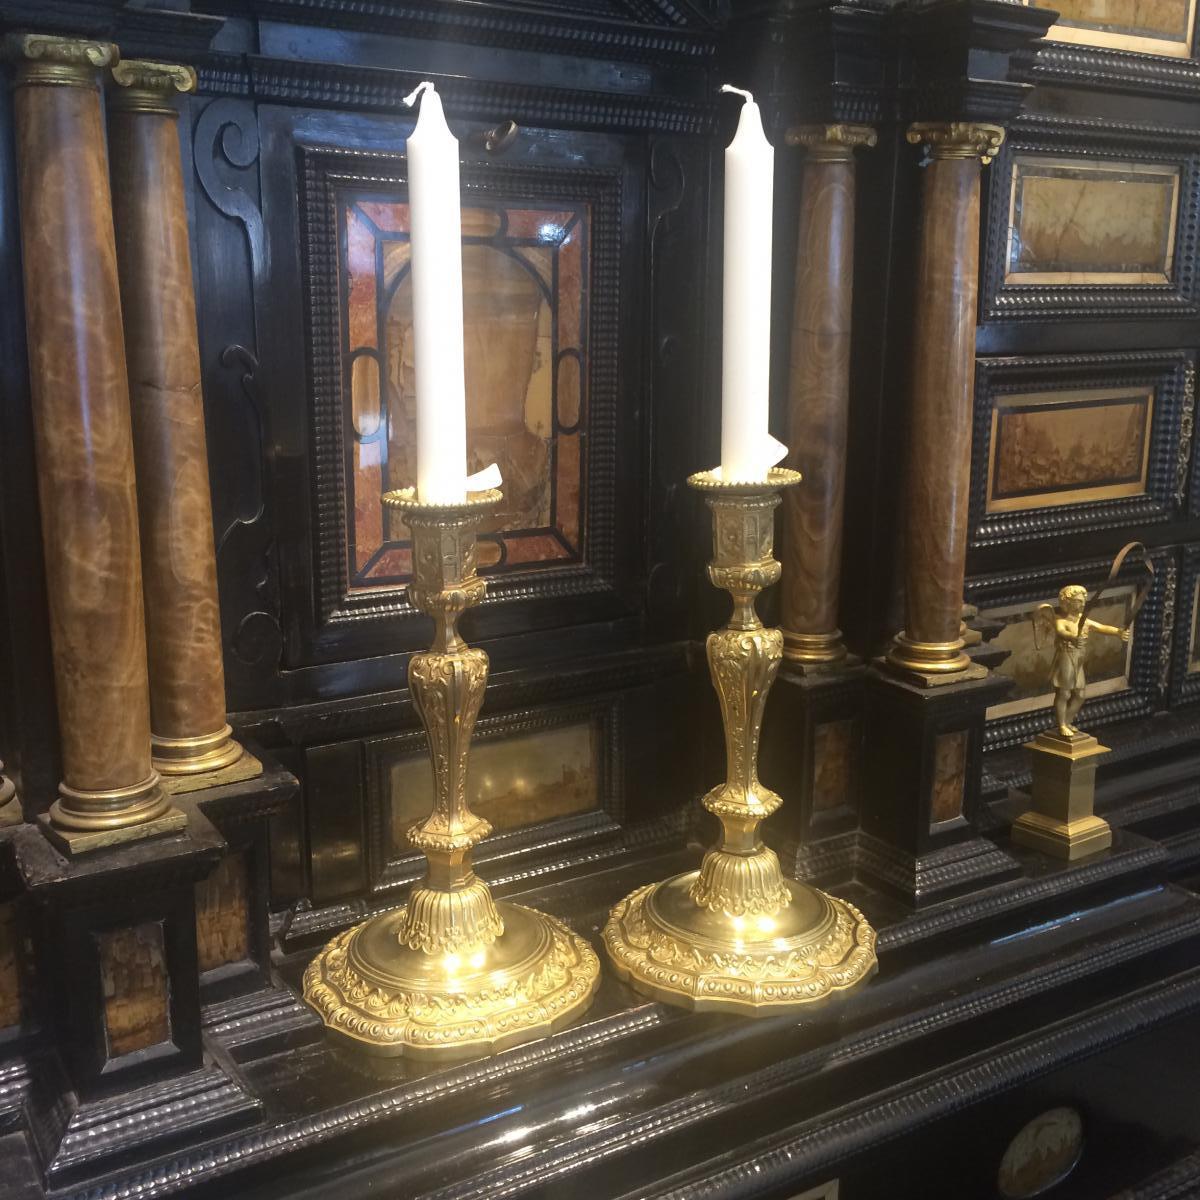 We are delighted to present you with this wonderful pair of beautifully gilded bronze Louis XV-style candle holders, dating back from the Napoleon III era. These intricately adorned candle holders, having motifs reminiscent of the Louis XV style,